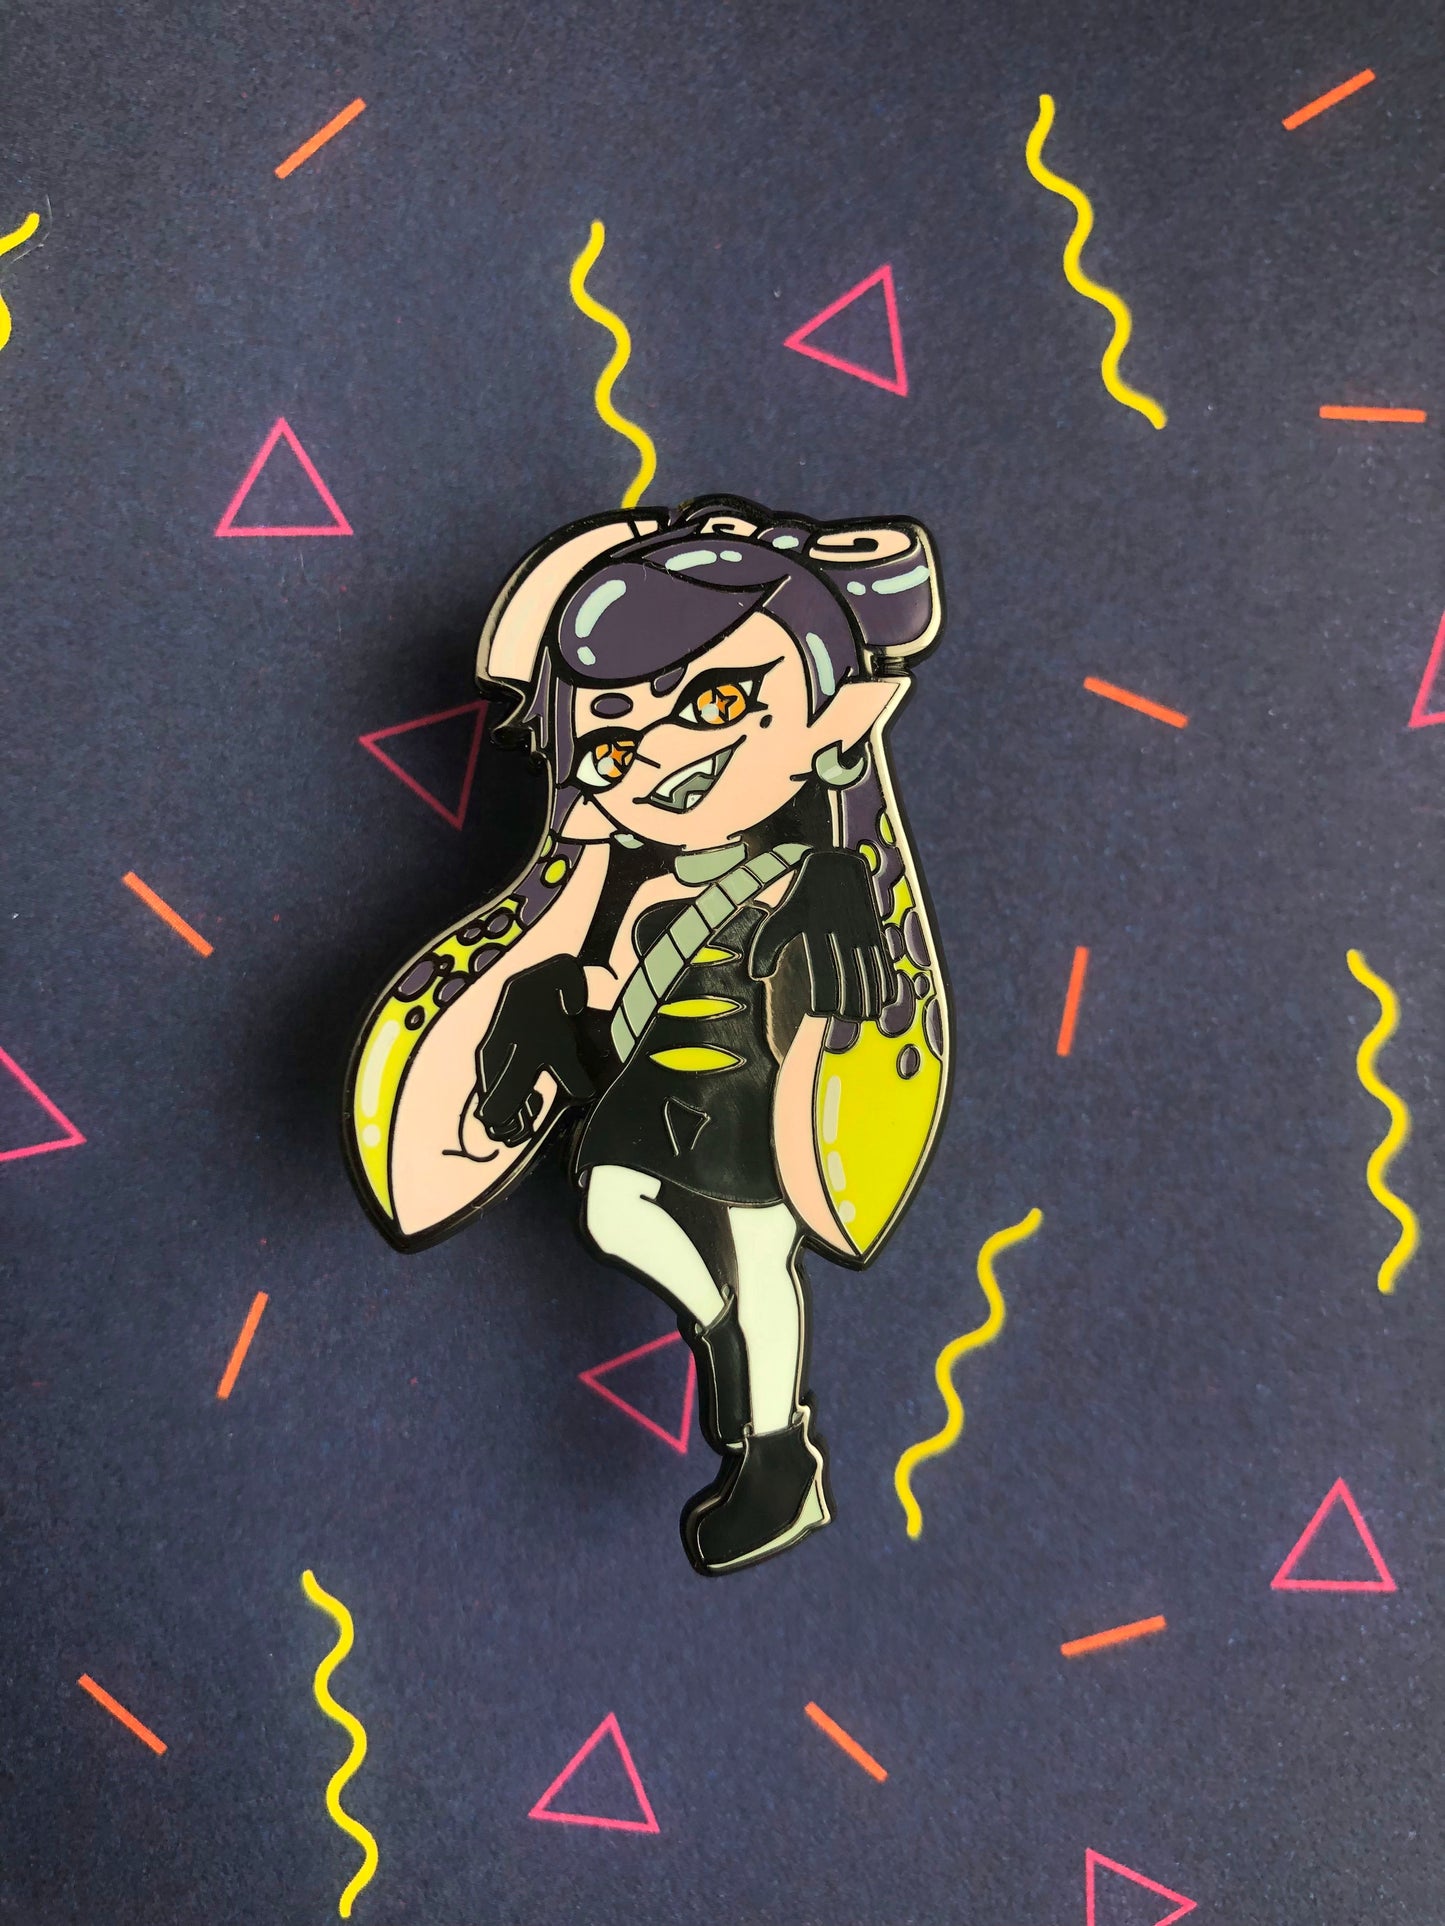 Callie and Marie Enamel Pins